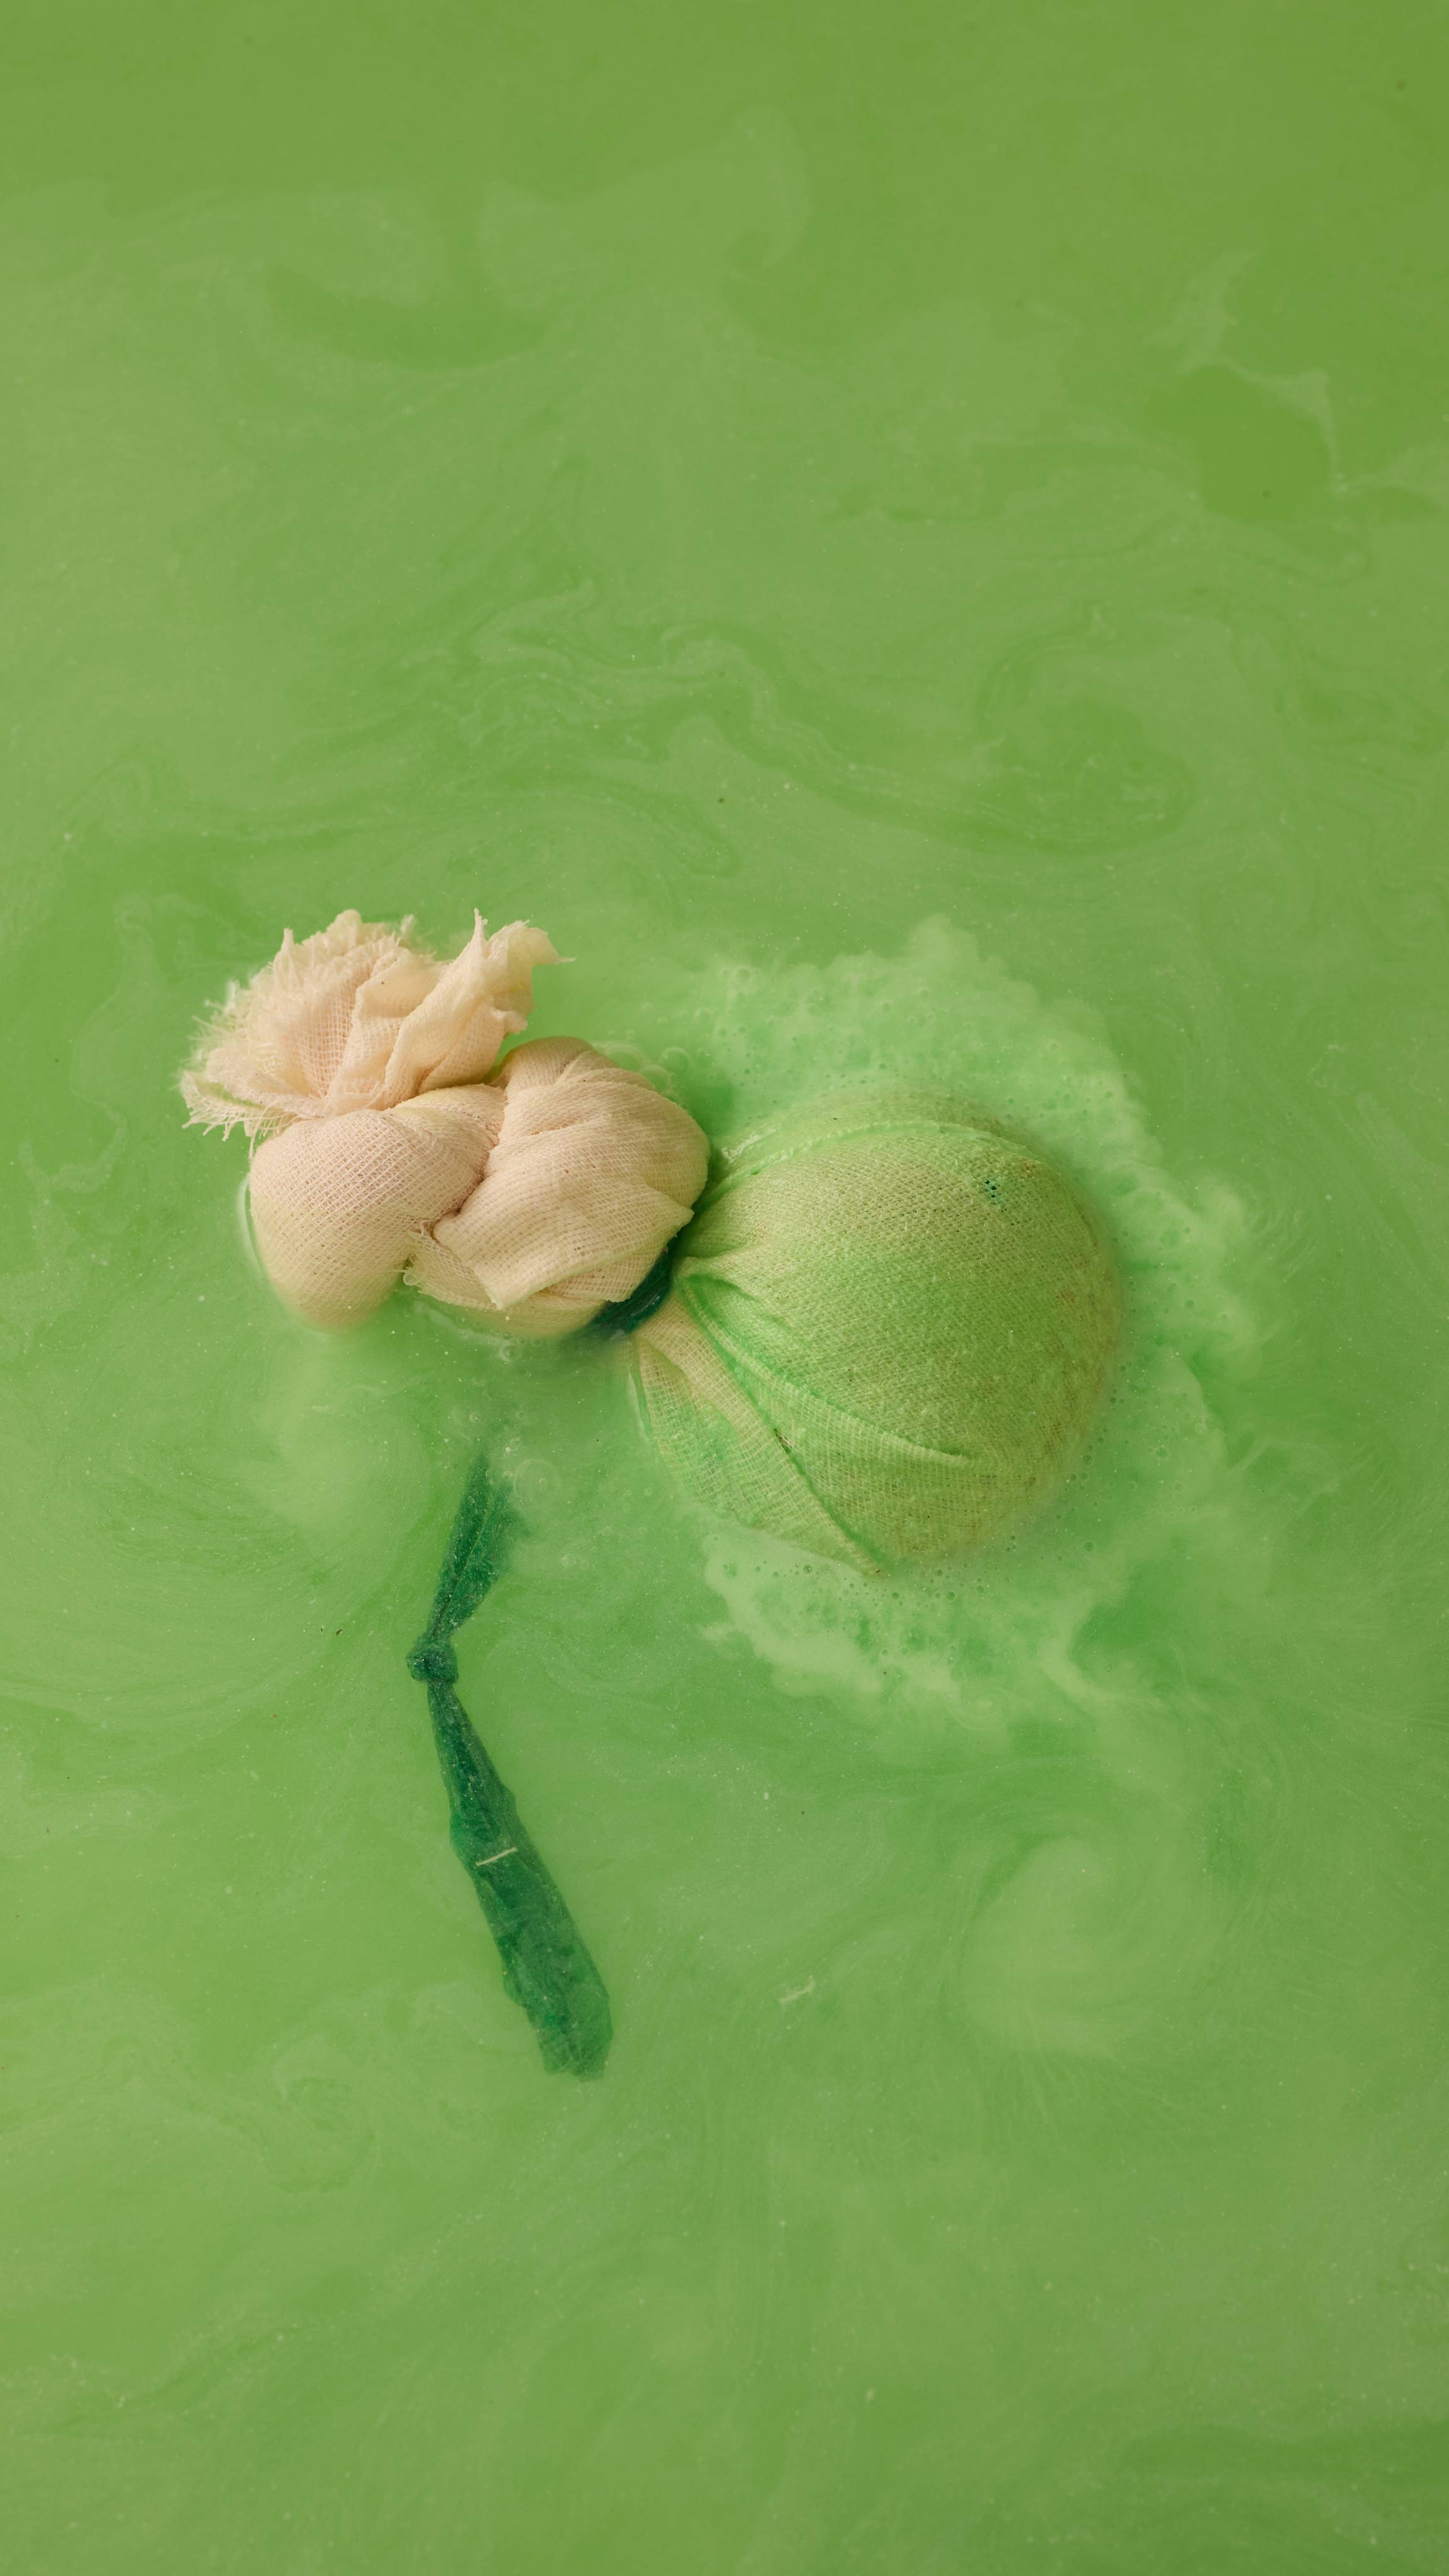 The Woodstock bath bomb is sitting in the bath as we see the deep green from the bath bomb inside the muslin seeps out into the water turning it into a sea of forest green.